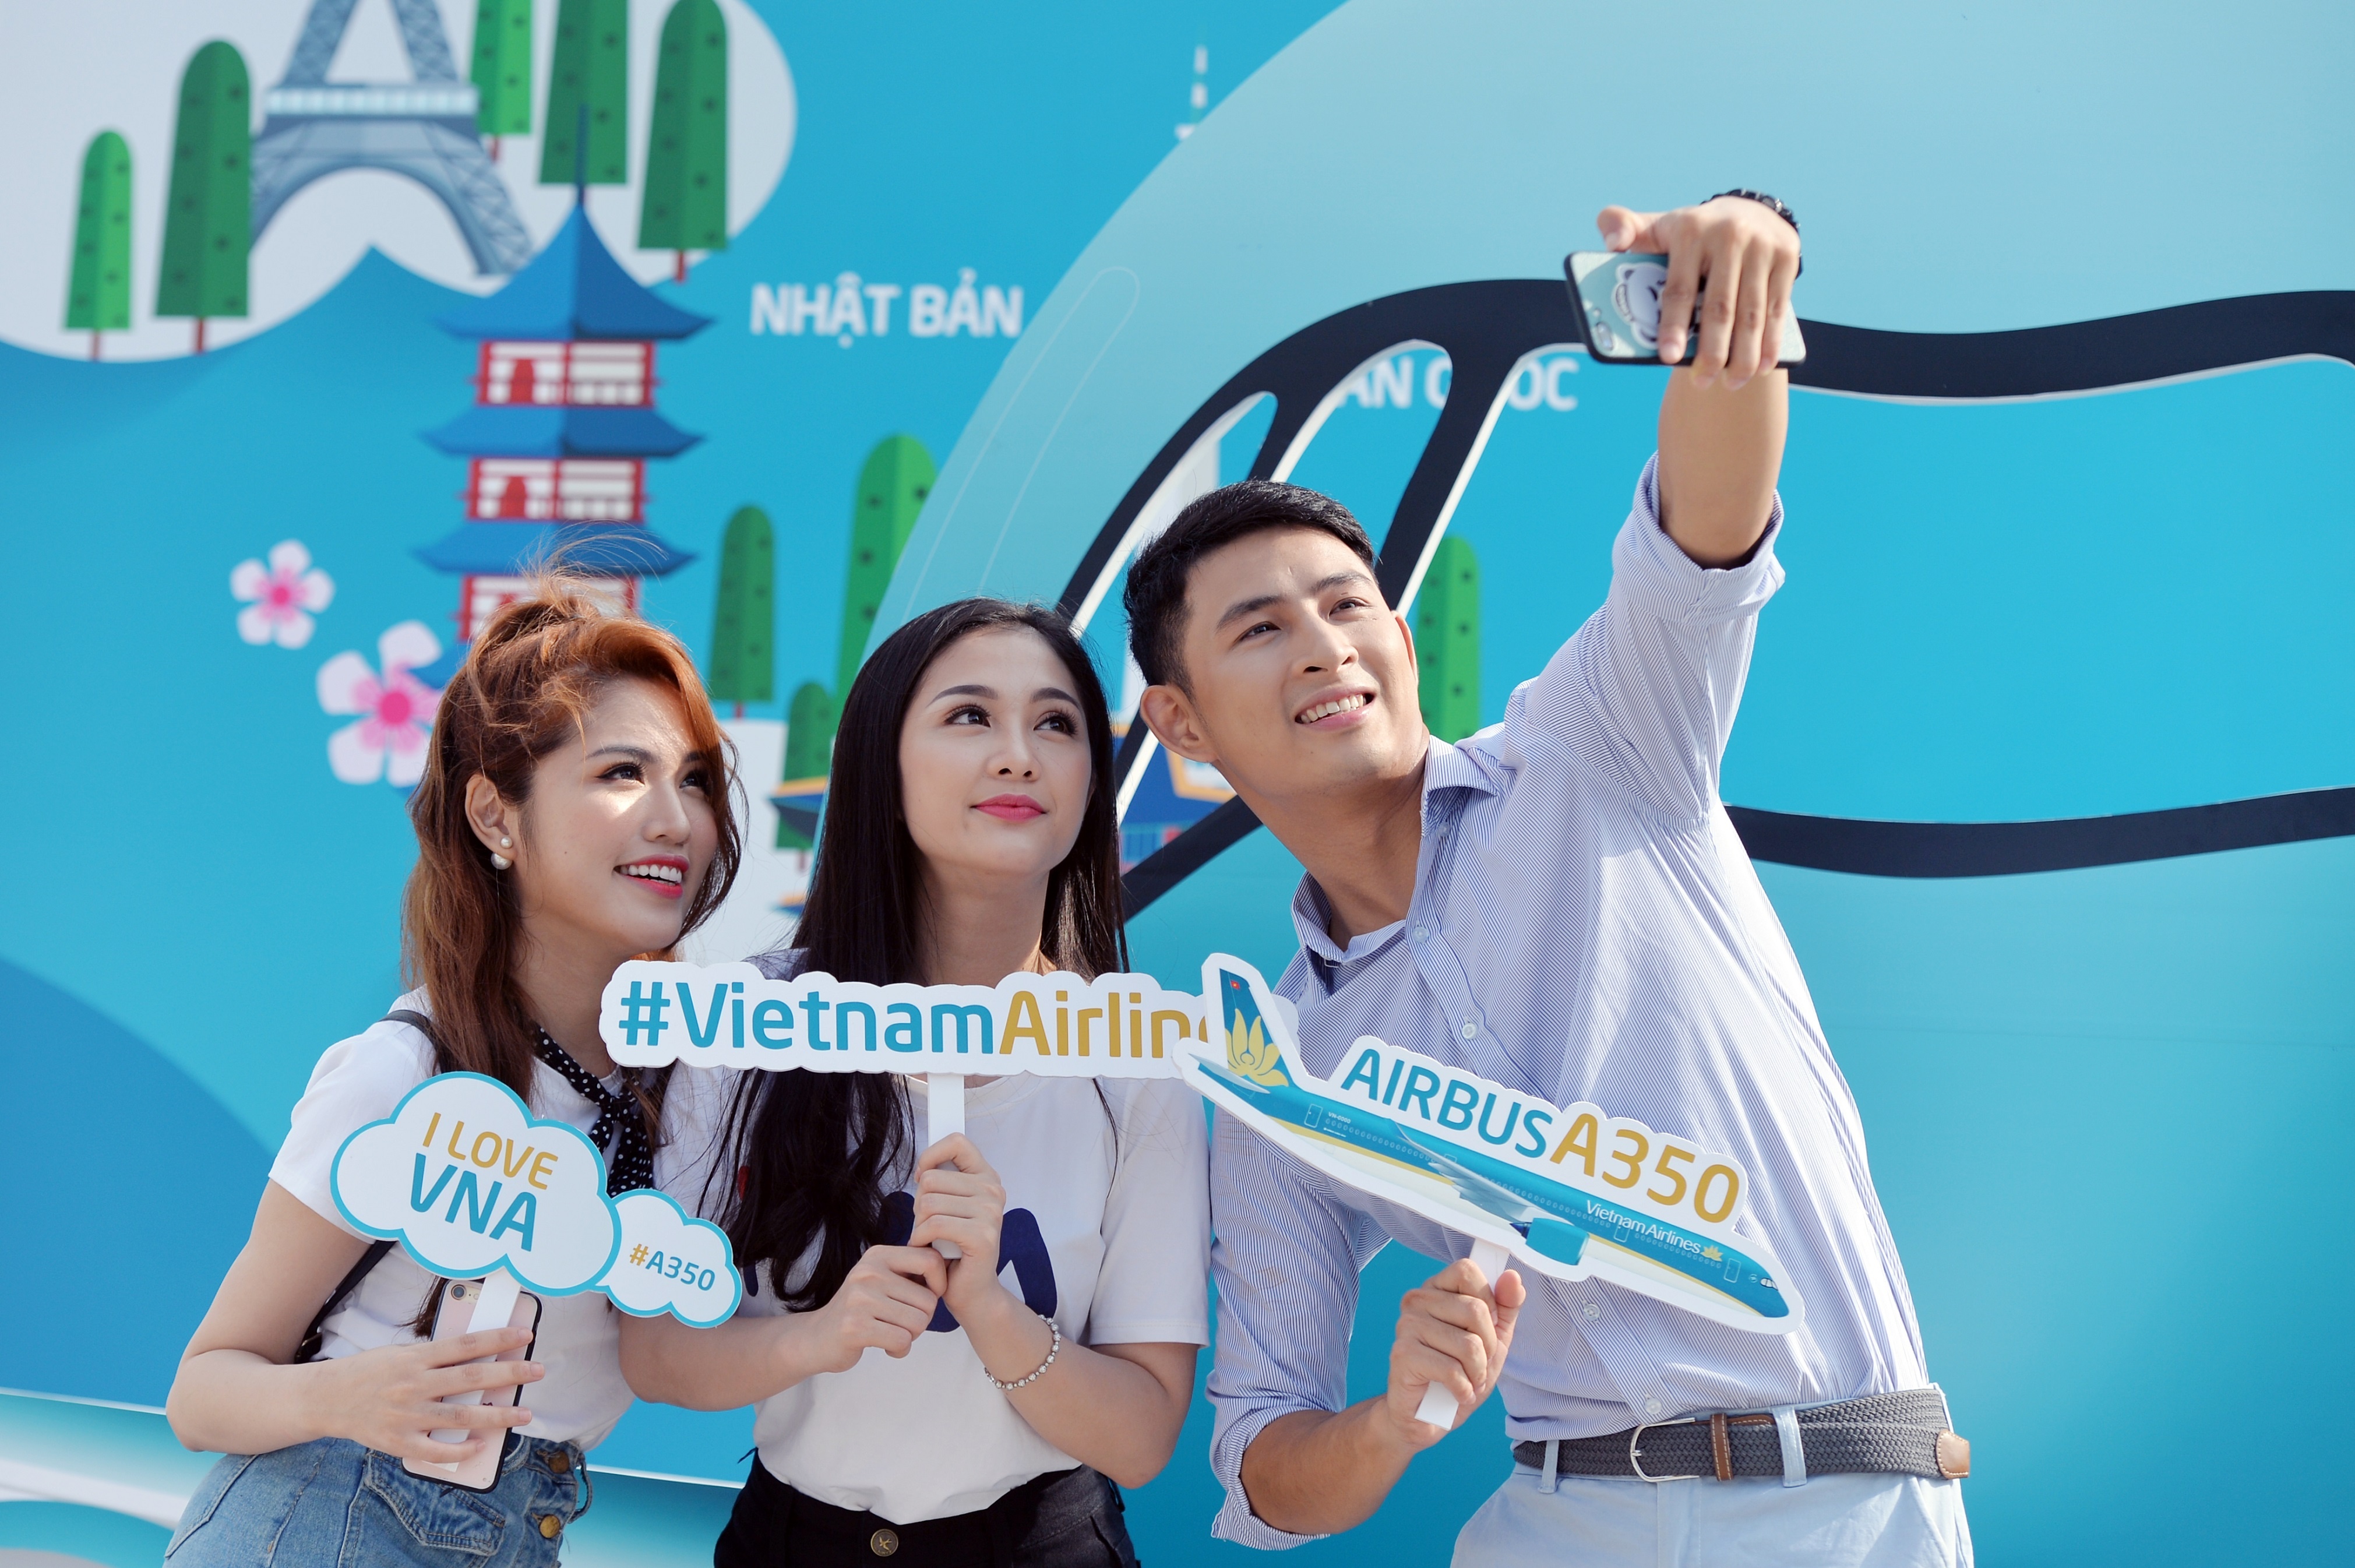 hanh khach Vietnam Airlines di may bay Airbus A350 anh 6